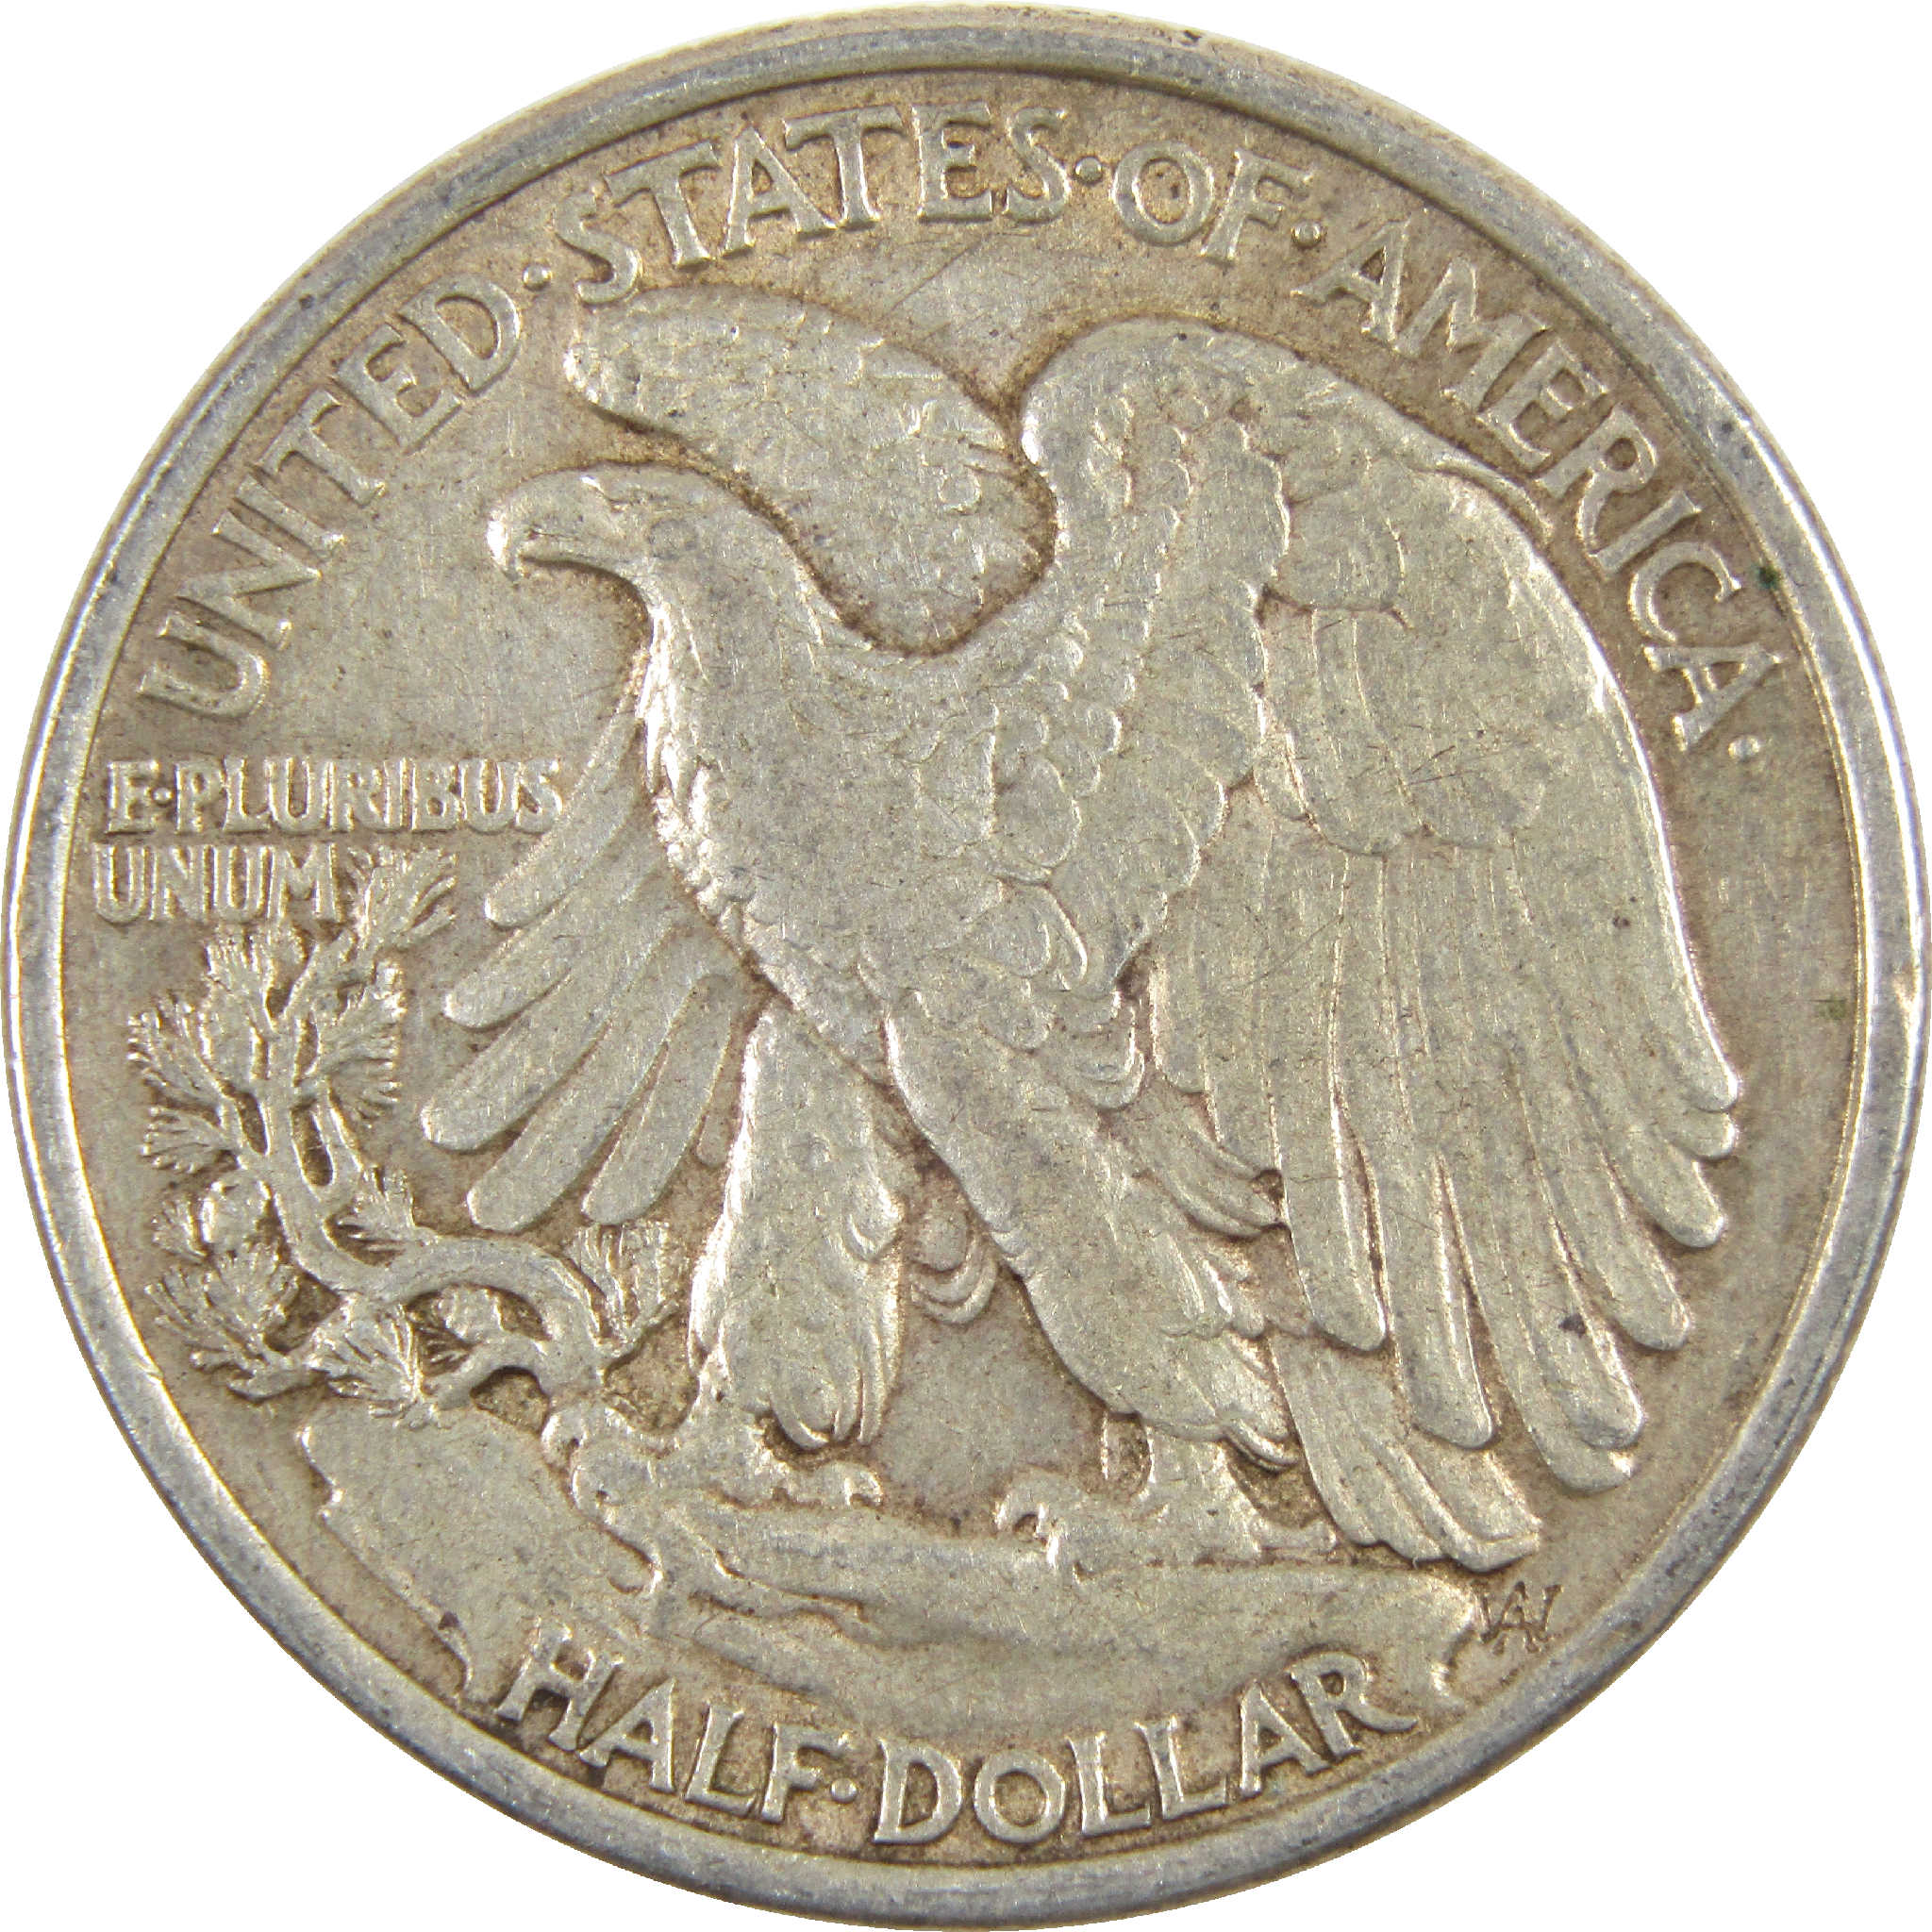 1936 Liberty Walking Half Dollar XF EF Extremely Fine Silver 50c Coin